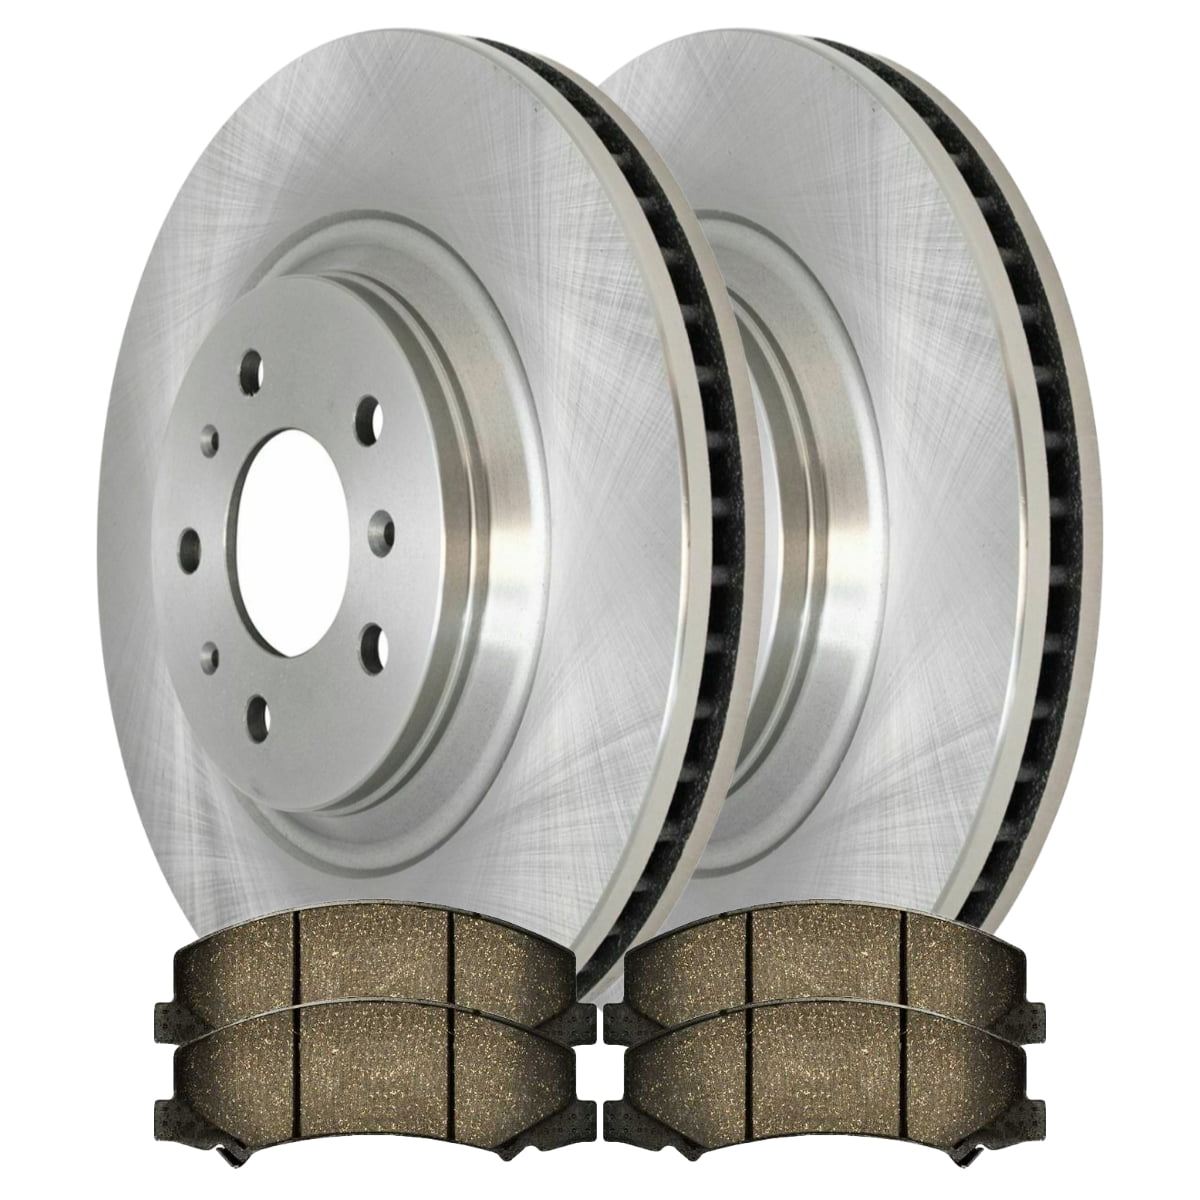 Front Brake Rotors And Ceramic Pads For Buick Lucerne Lacrosse DTS Chevy Impala 